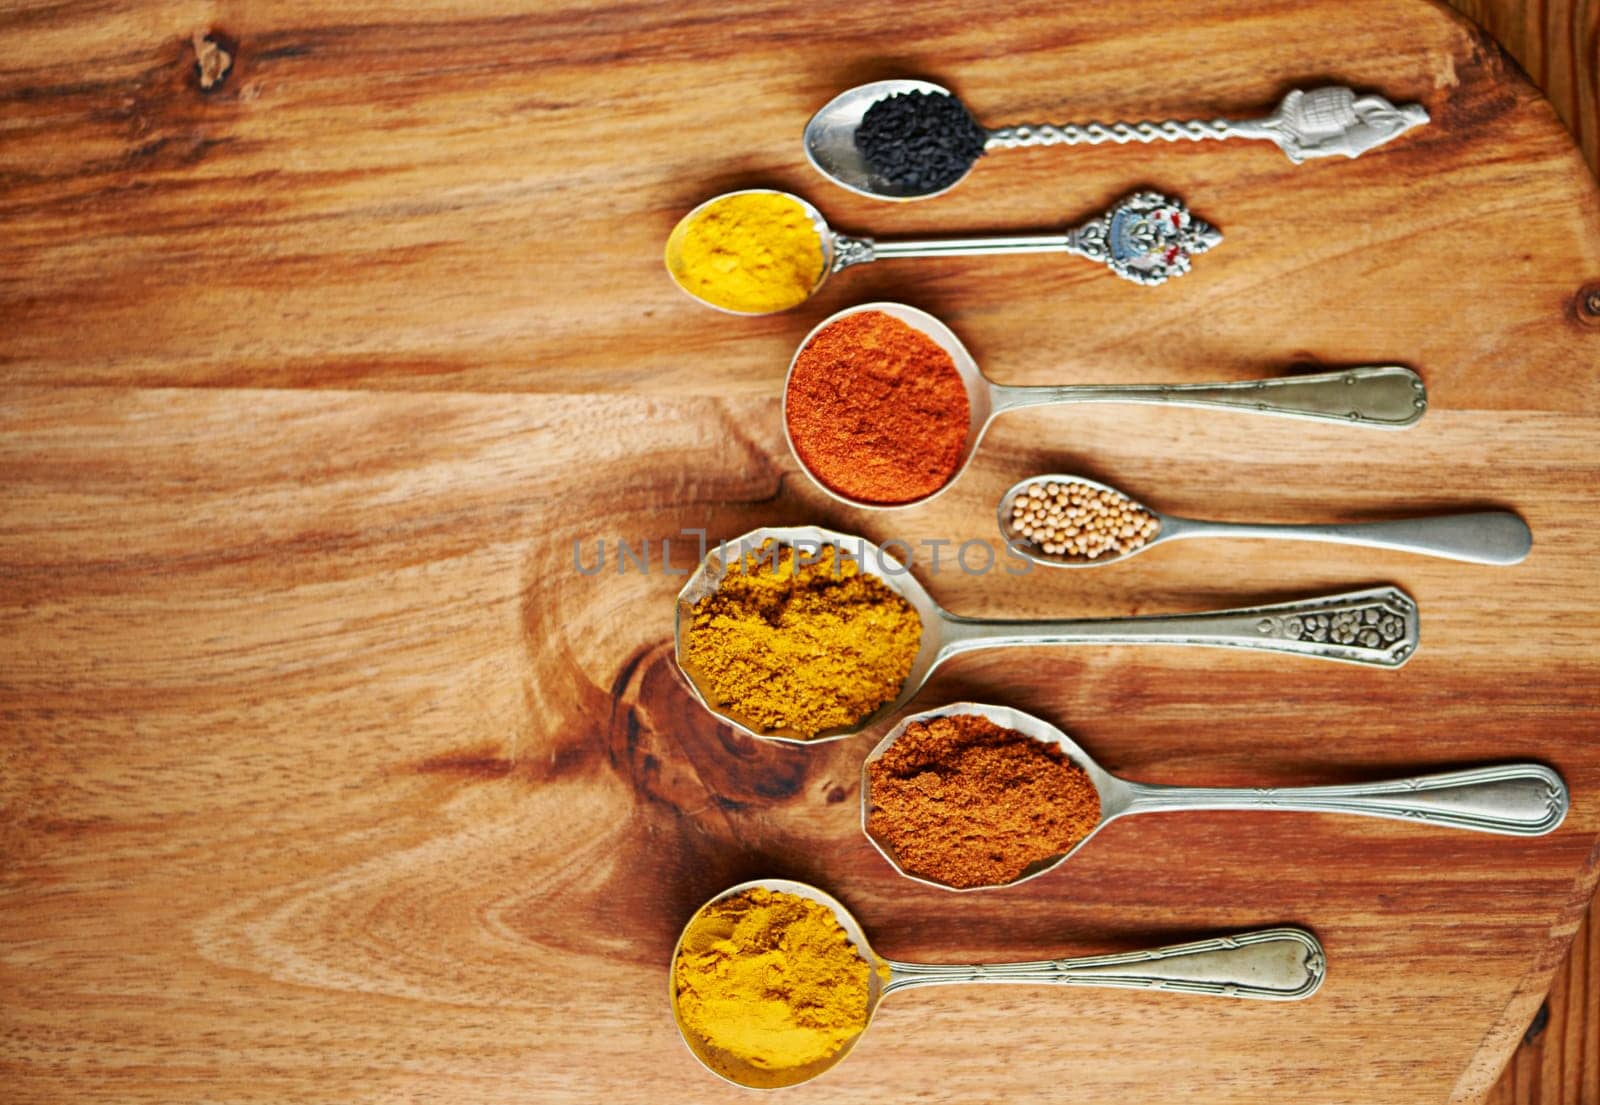 Spoons, spice and selection of ingredients for seasoning on kitchen table, turmeric and paprika for meal. Top view, condiments and options for cooking in Indian culture, cumin and food preparation by YuriArcurs